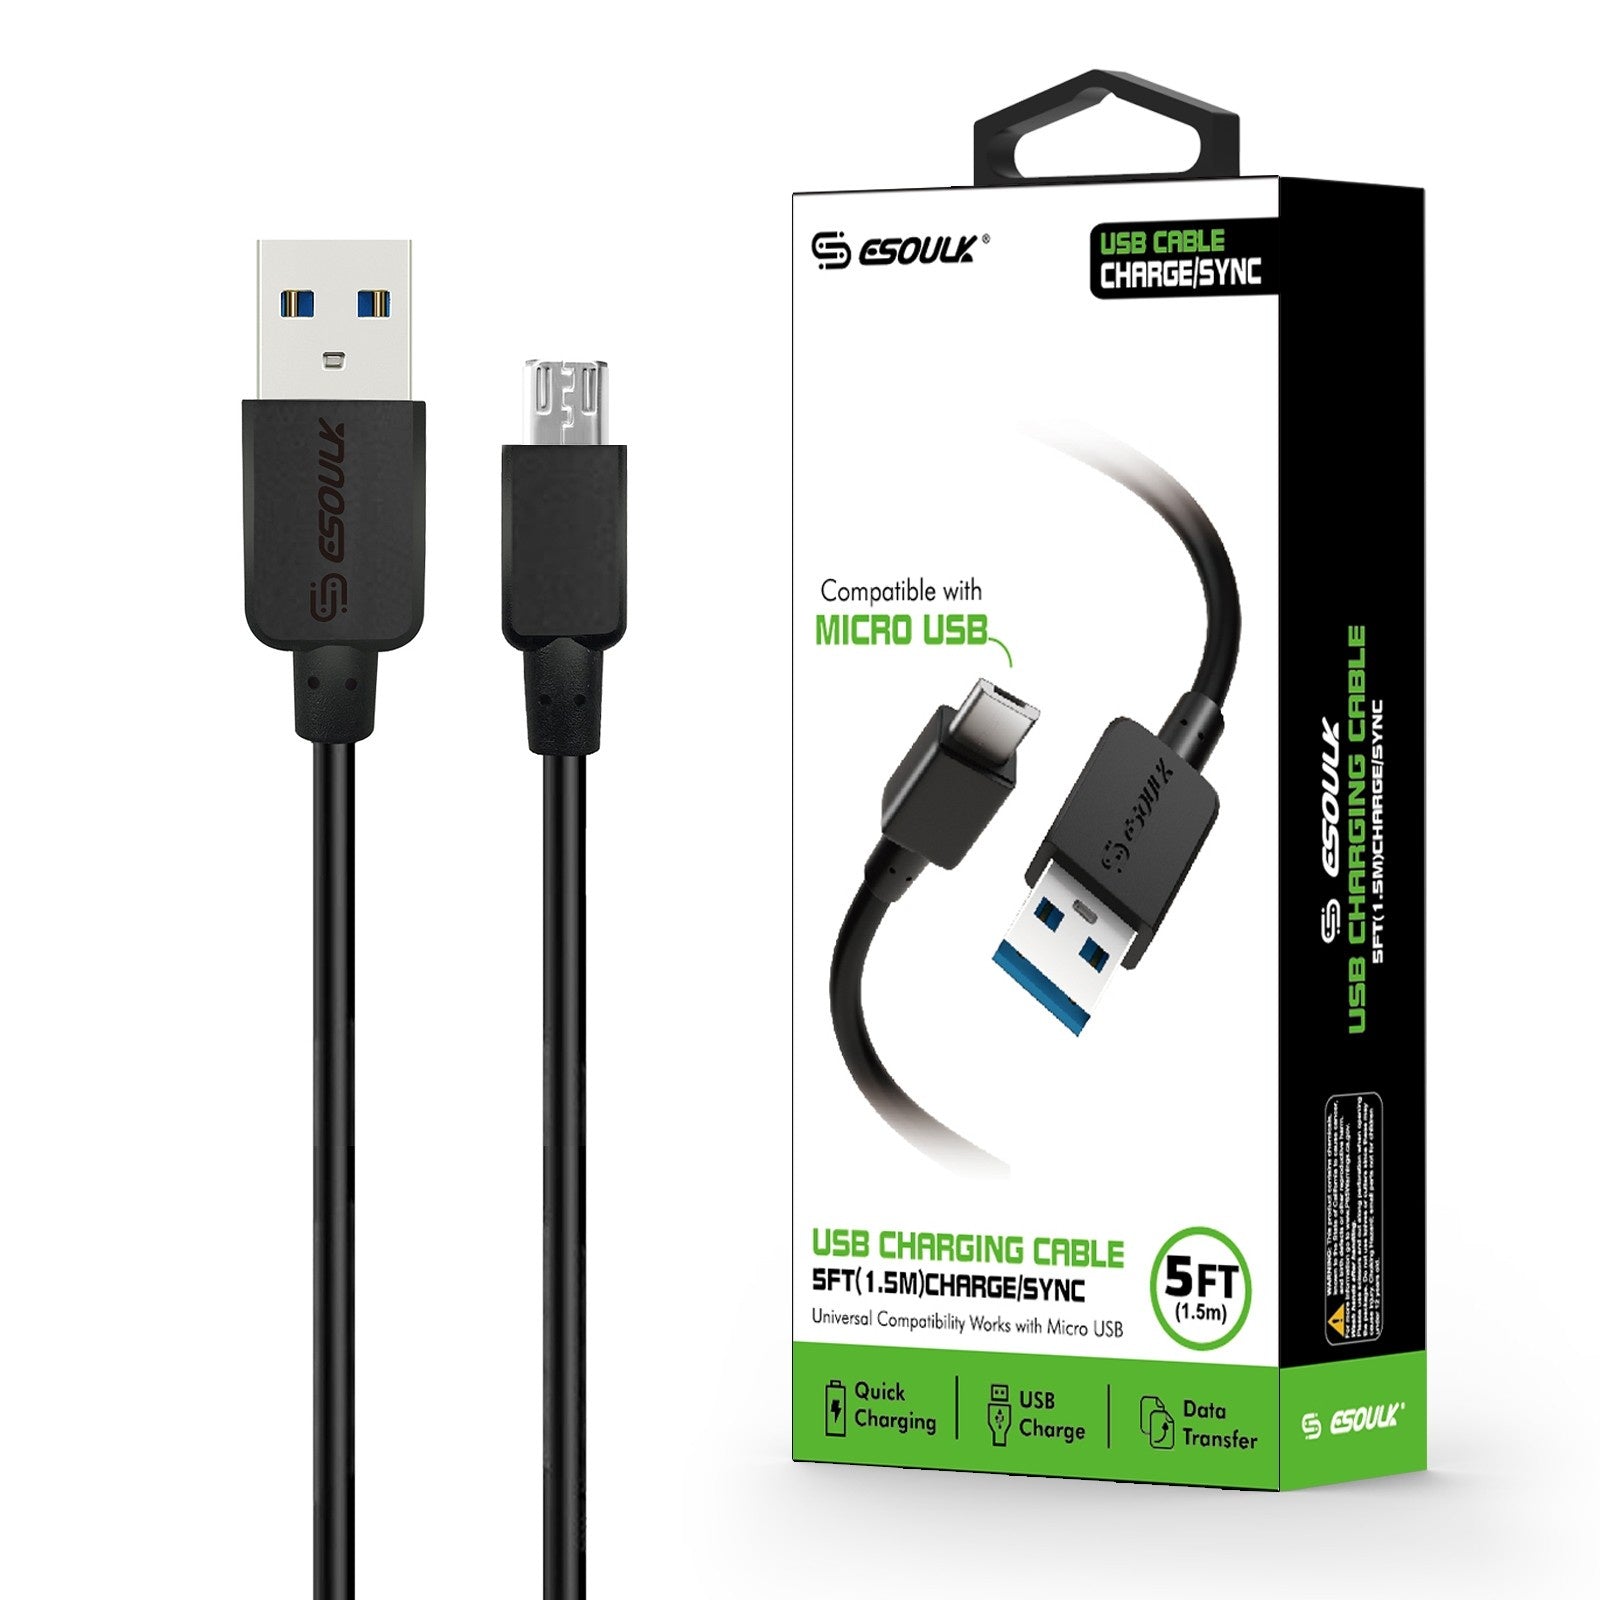 ESOULK 5ft Faster Speed Charging Cable For MICRO